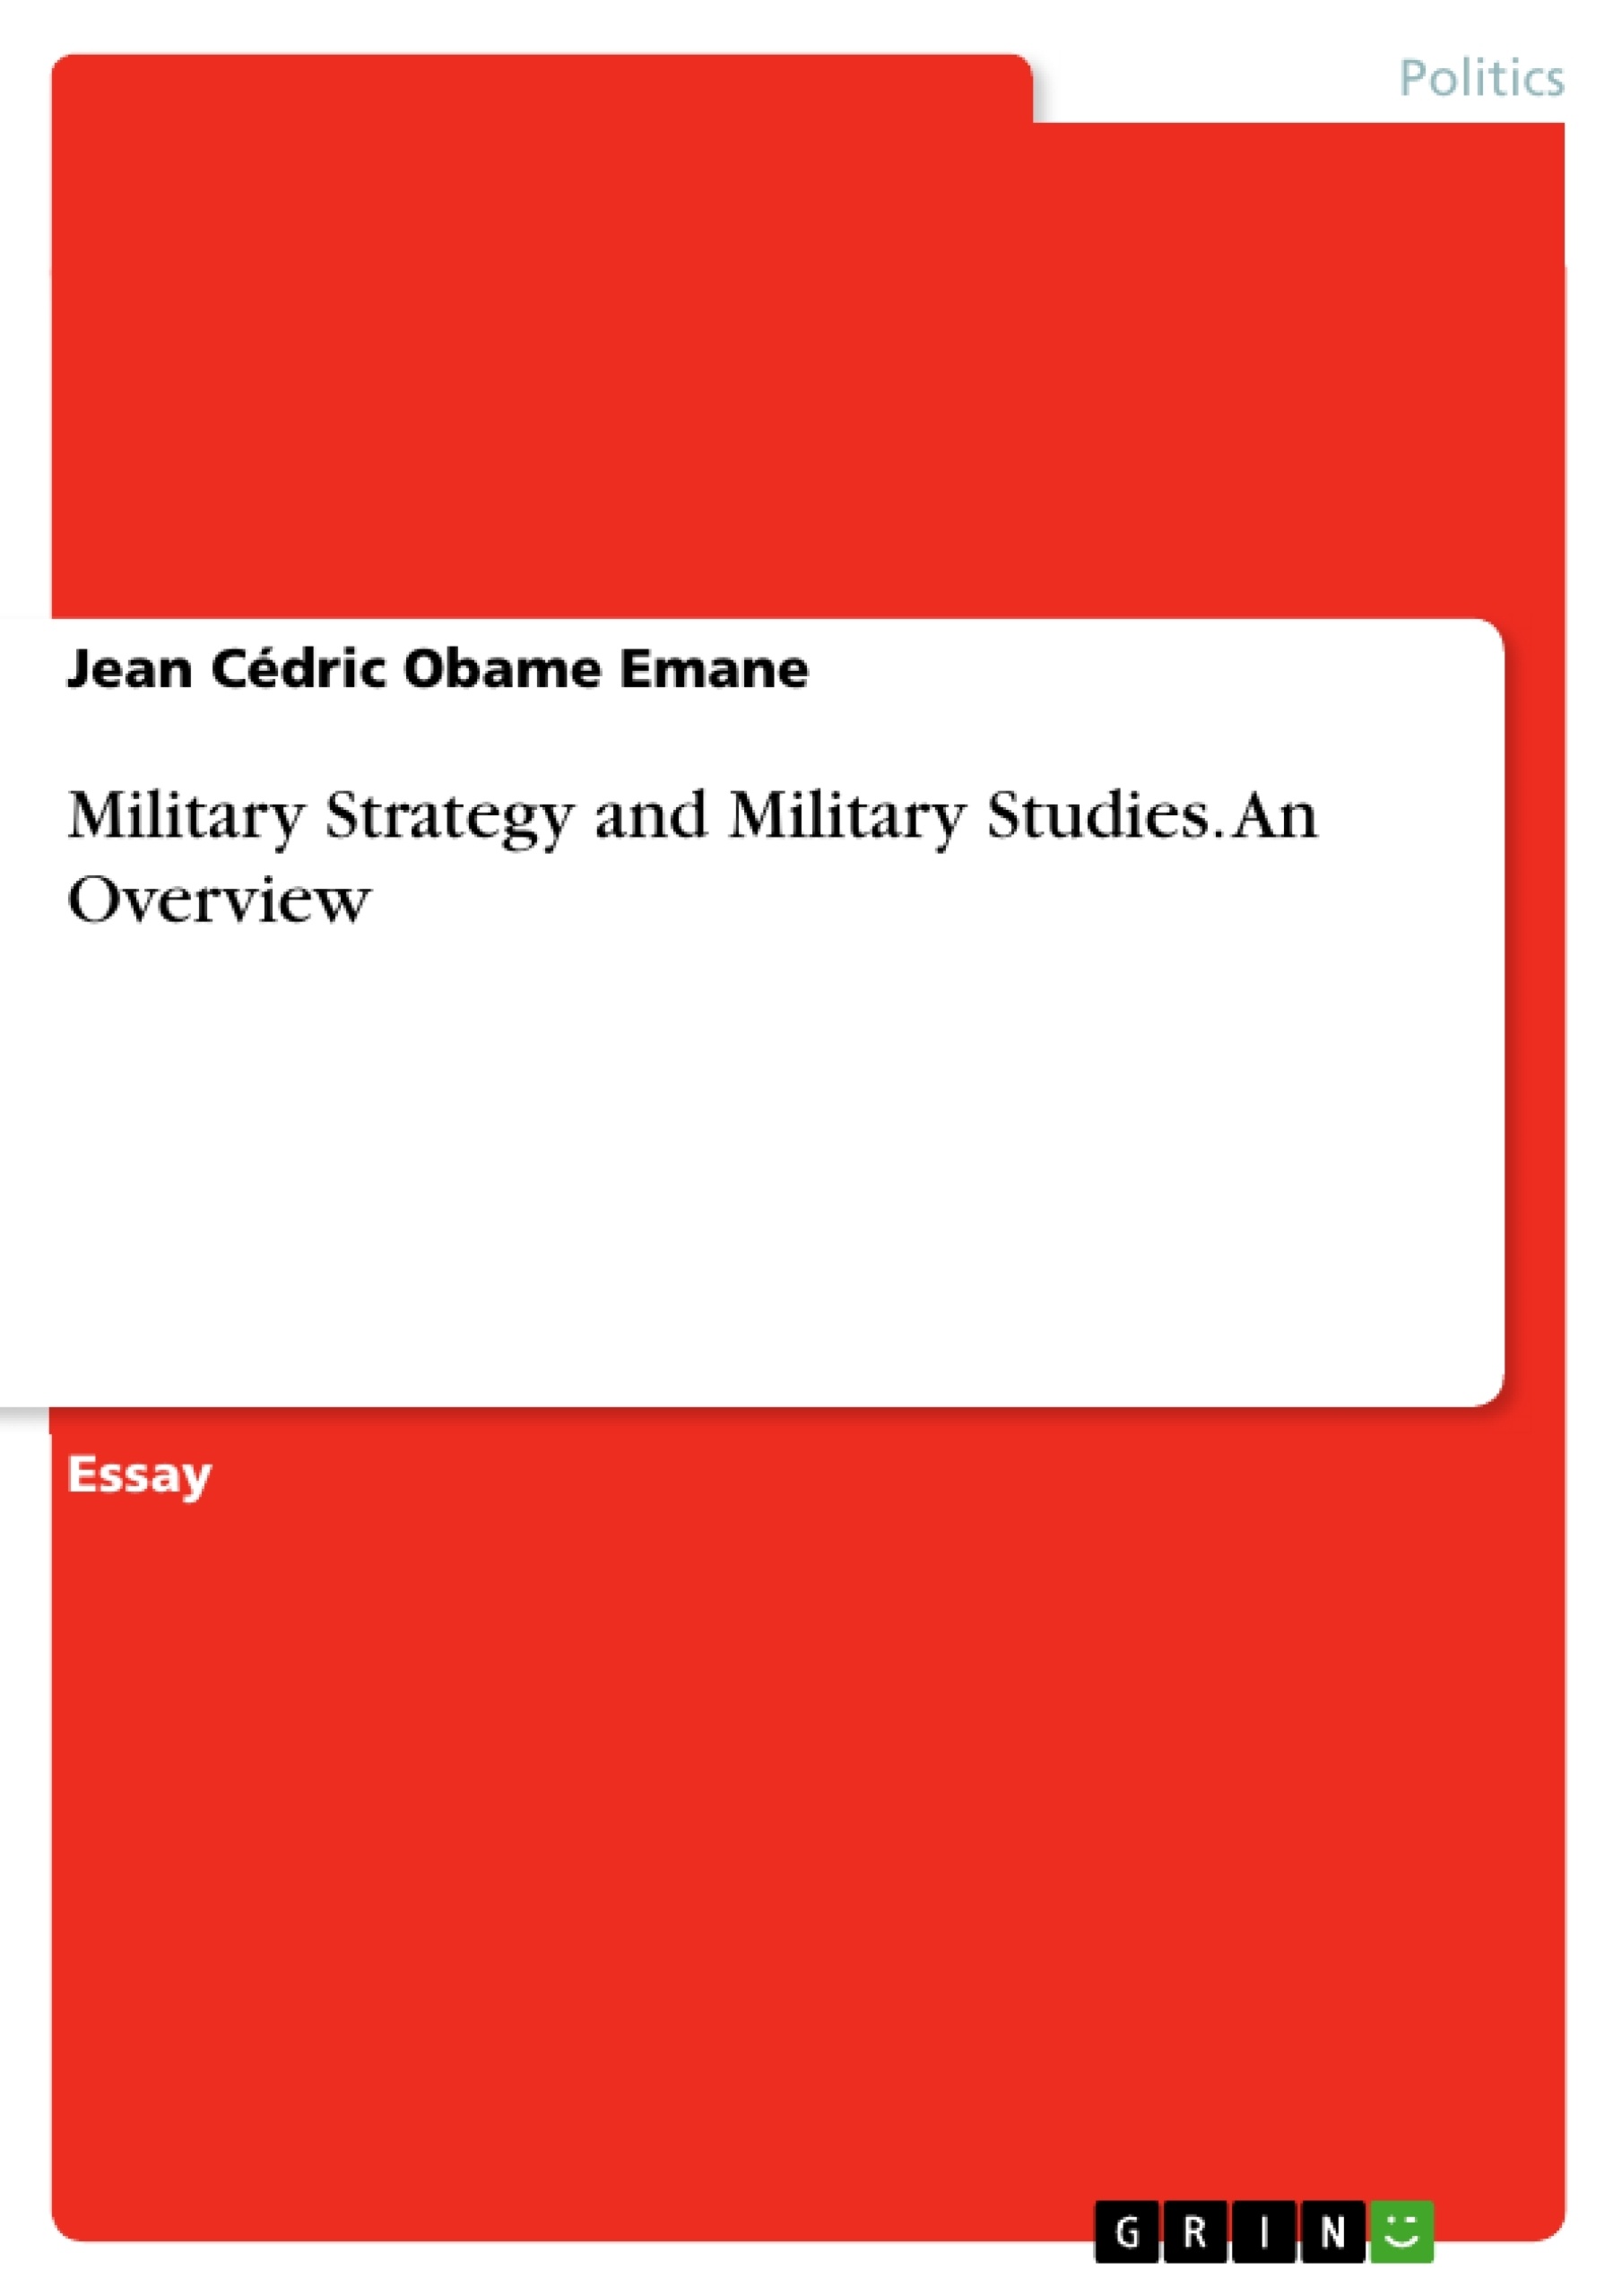 Title: Military Strategy and Military Studies. An Overview